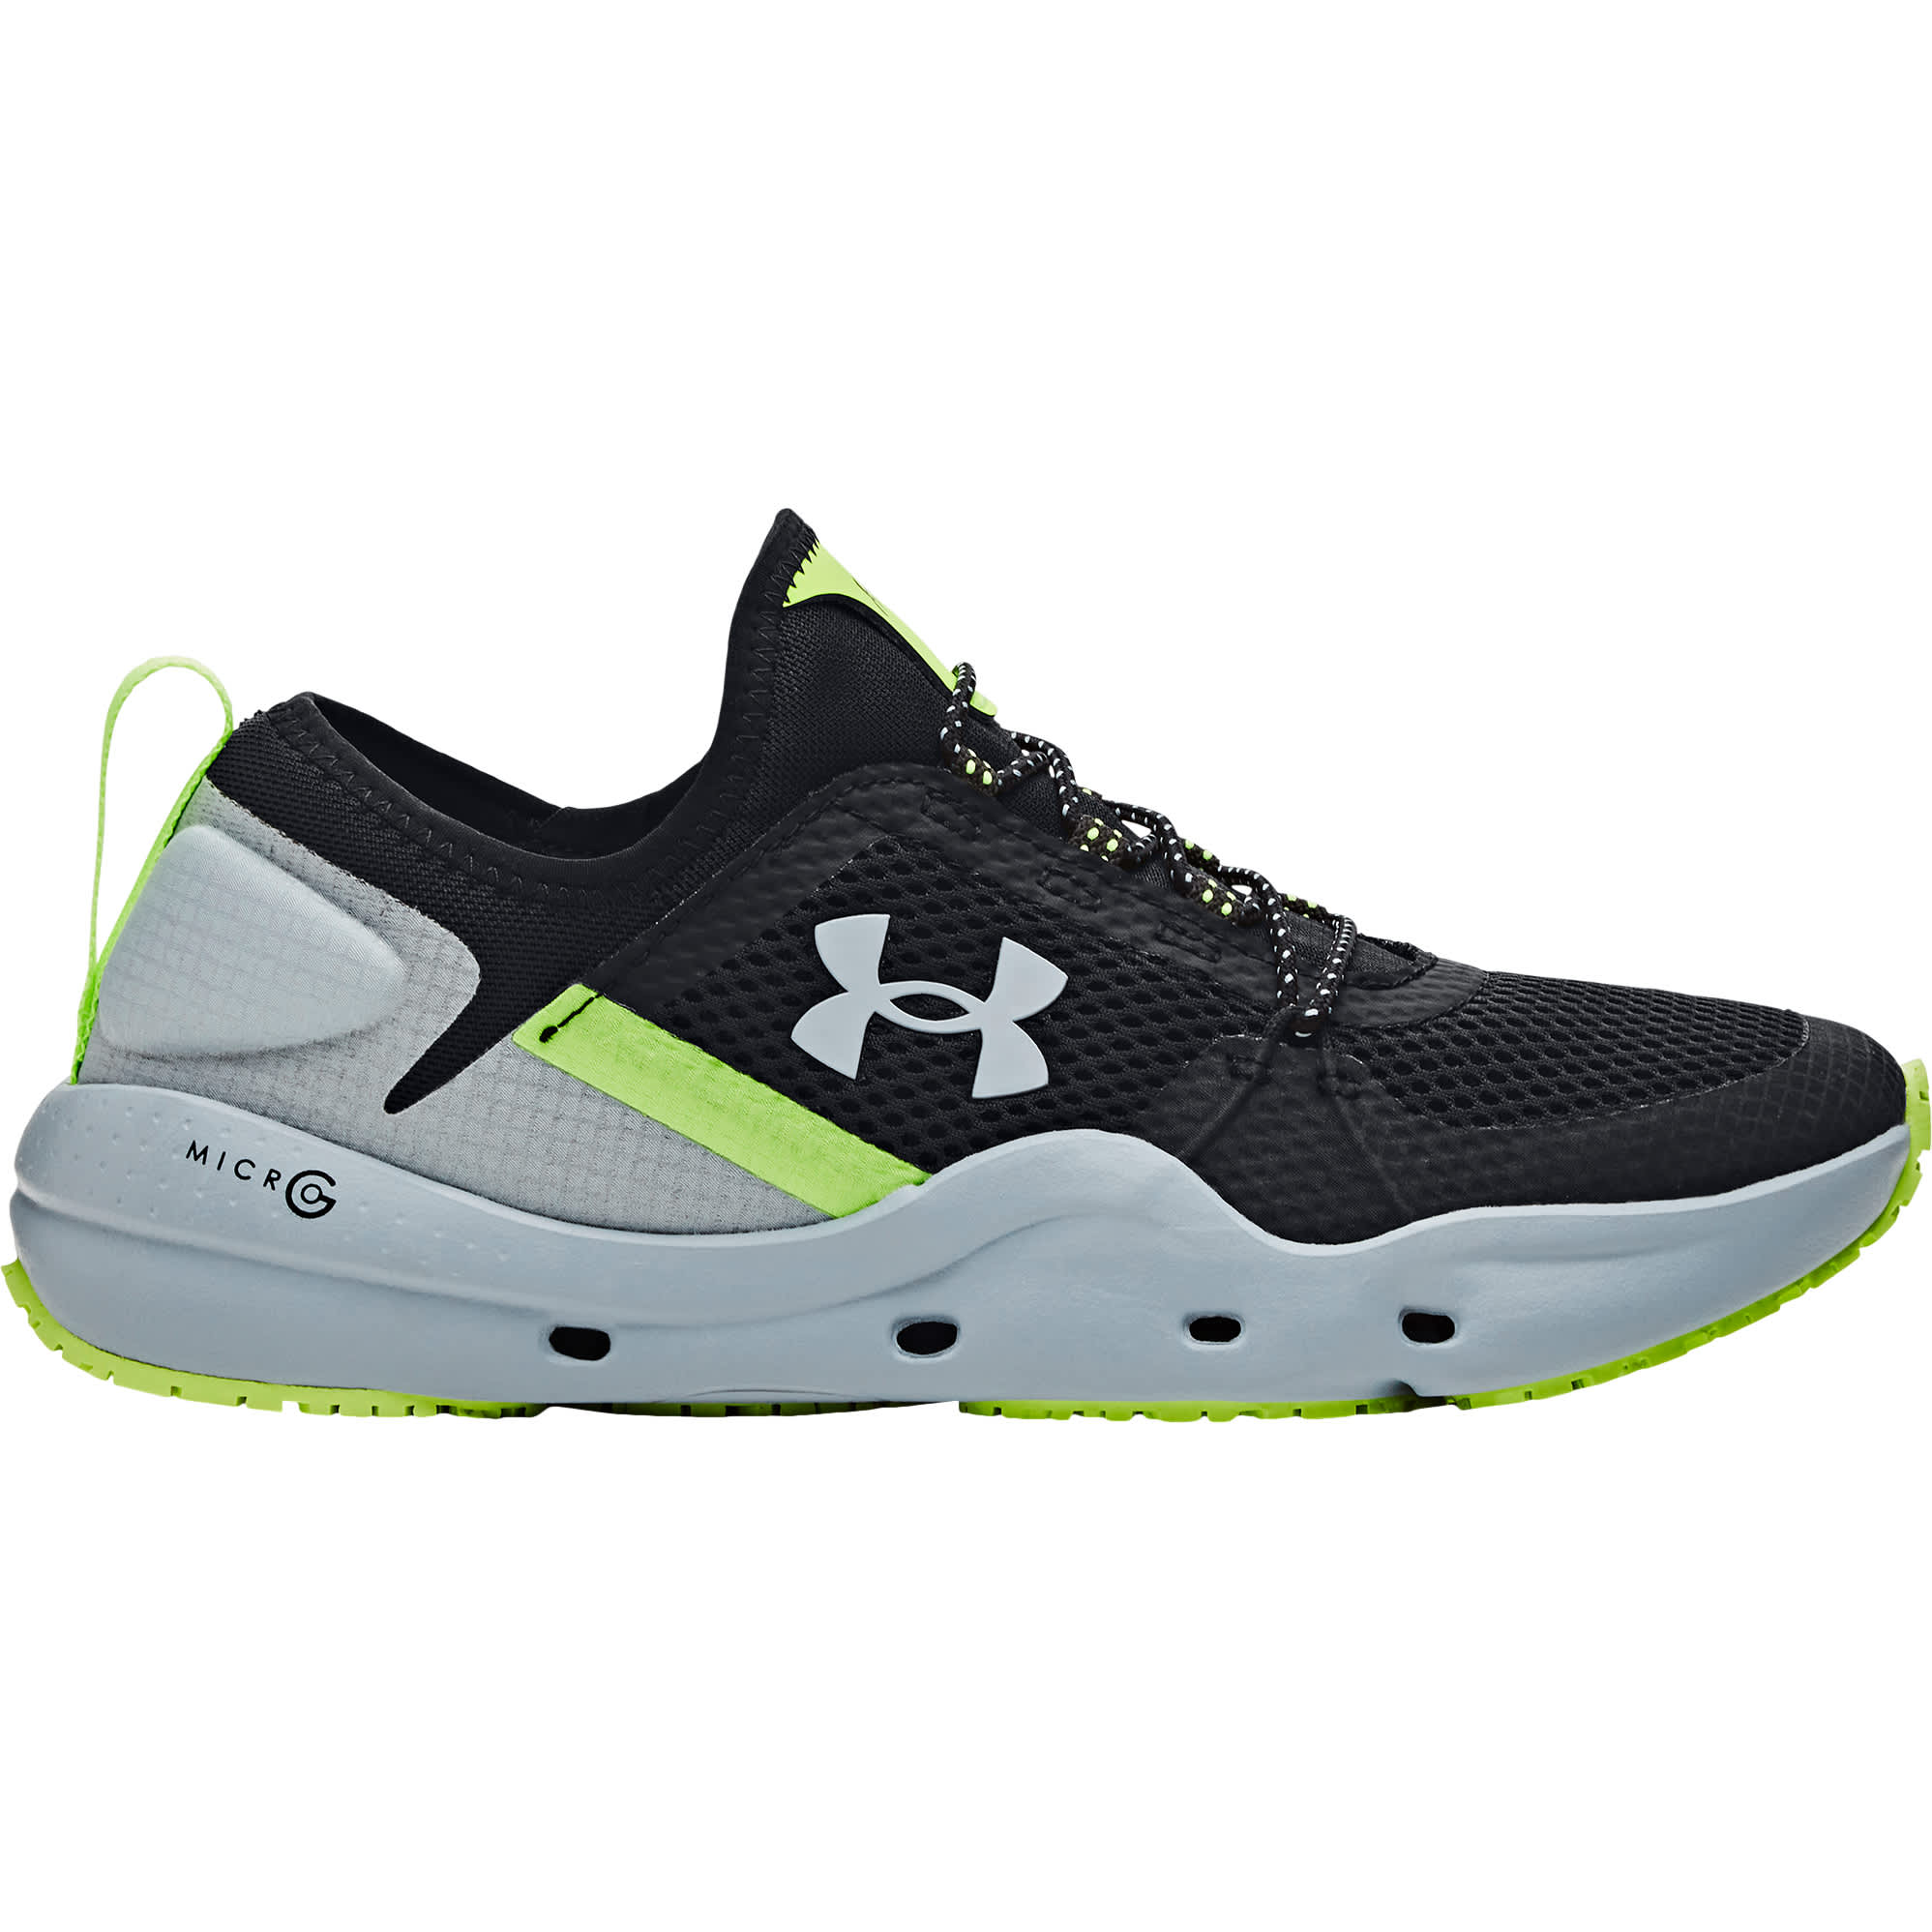 Under Armour® Men's Micro G® Kilchis Fishing Shoes